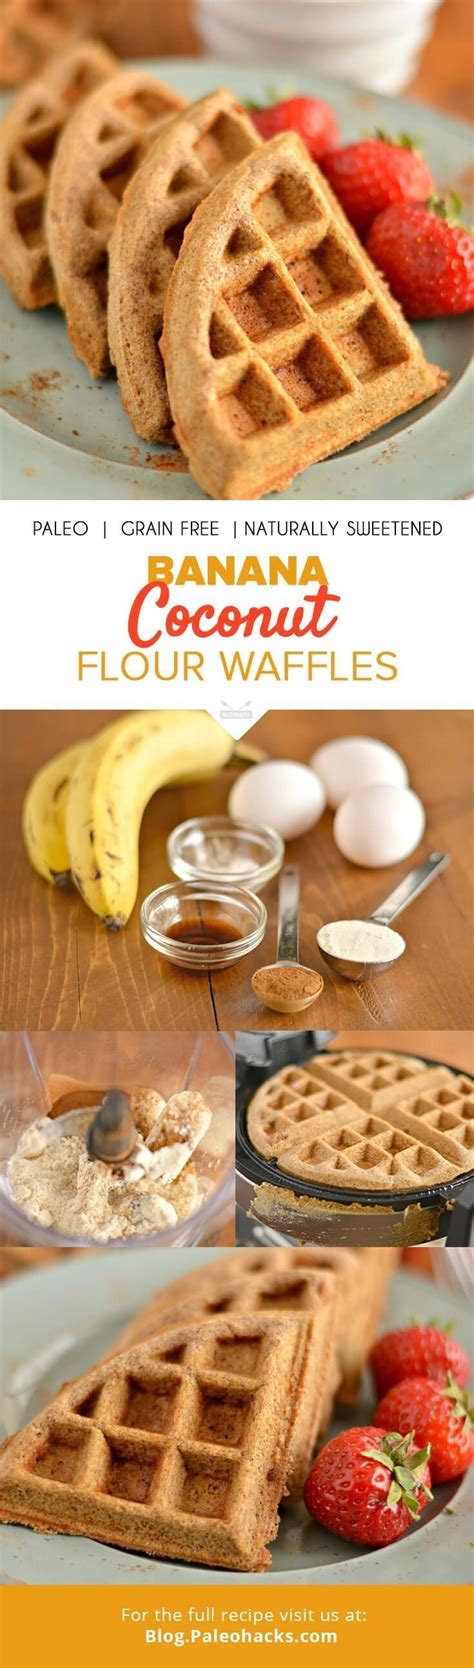 In places where different varieties of green bananas grow (such as south america, the caribbean, southeast asia, and parts of africa). These Paleo Banana Coconut Flour Waffles are dairy-free ...